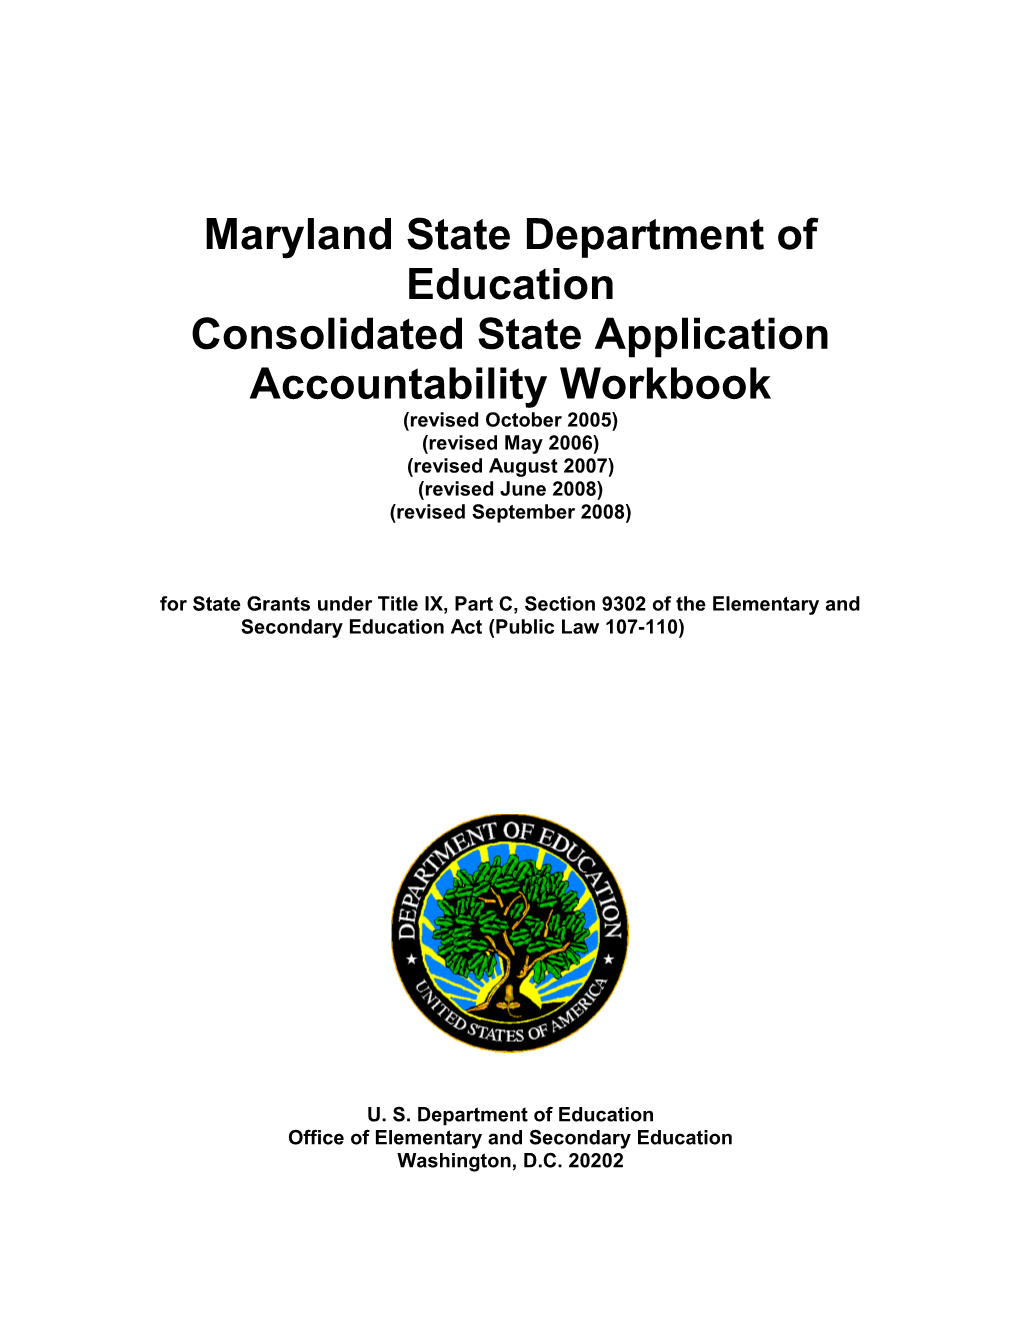 Consolidated State Application Accountability Workbook (MSWORD) s1